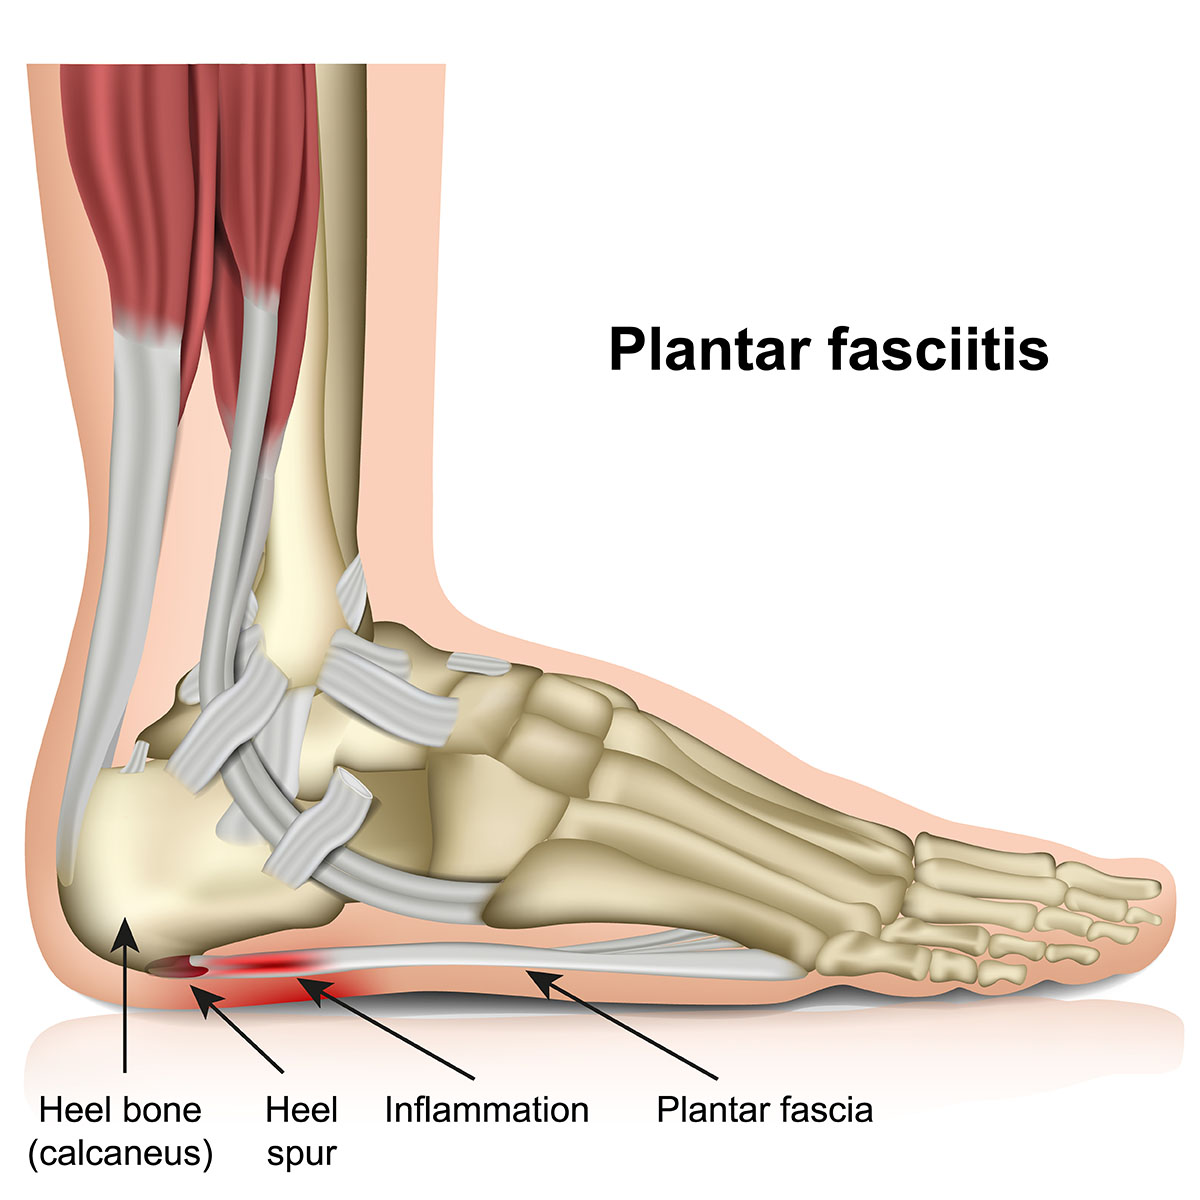 The Best Way To Manage Plantar Fasciitis - CT Physical Therapy Care